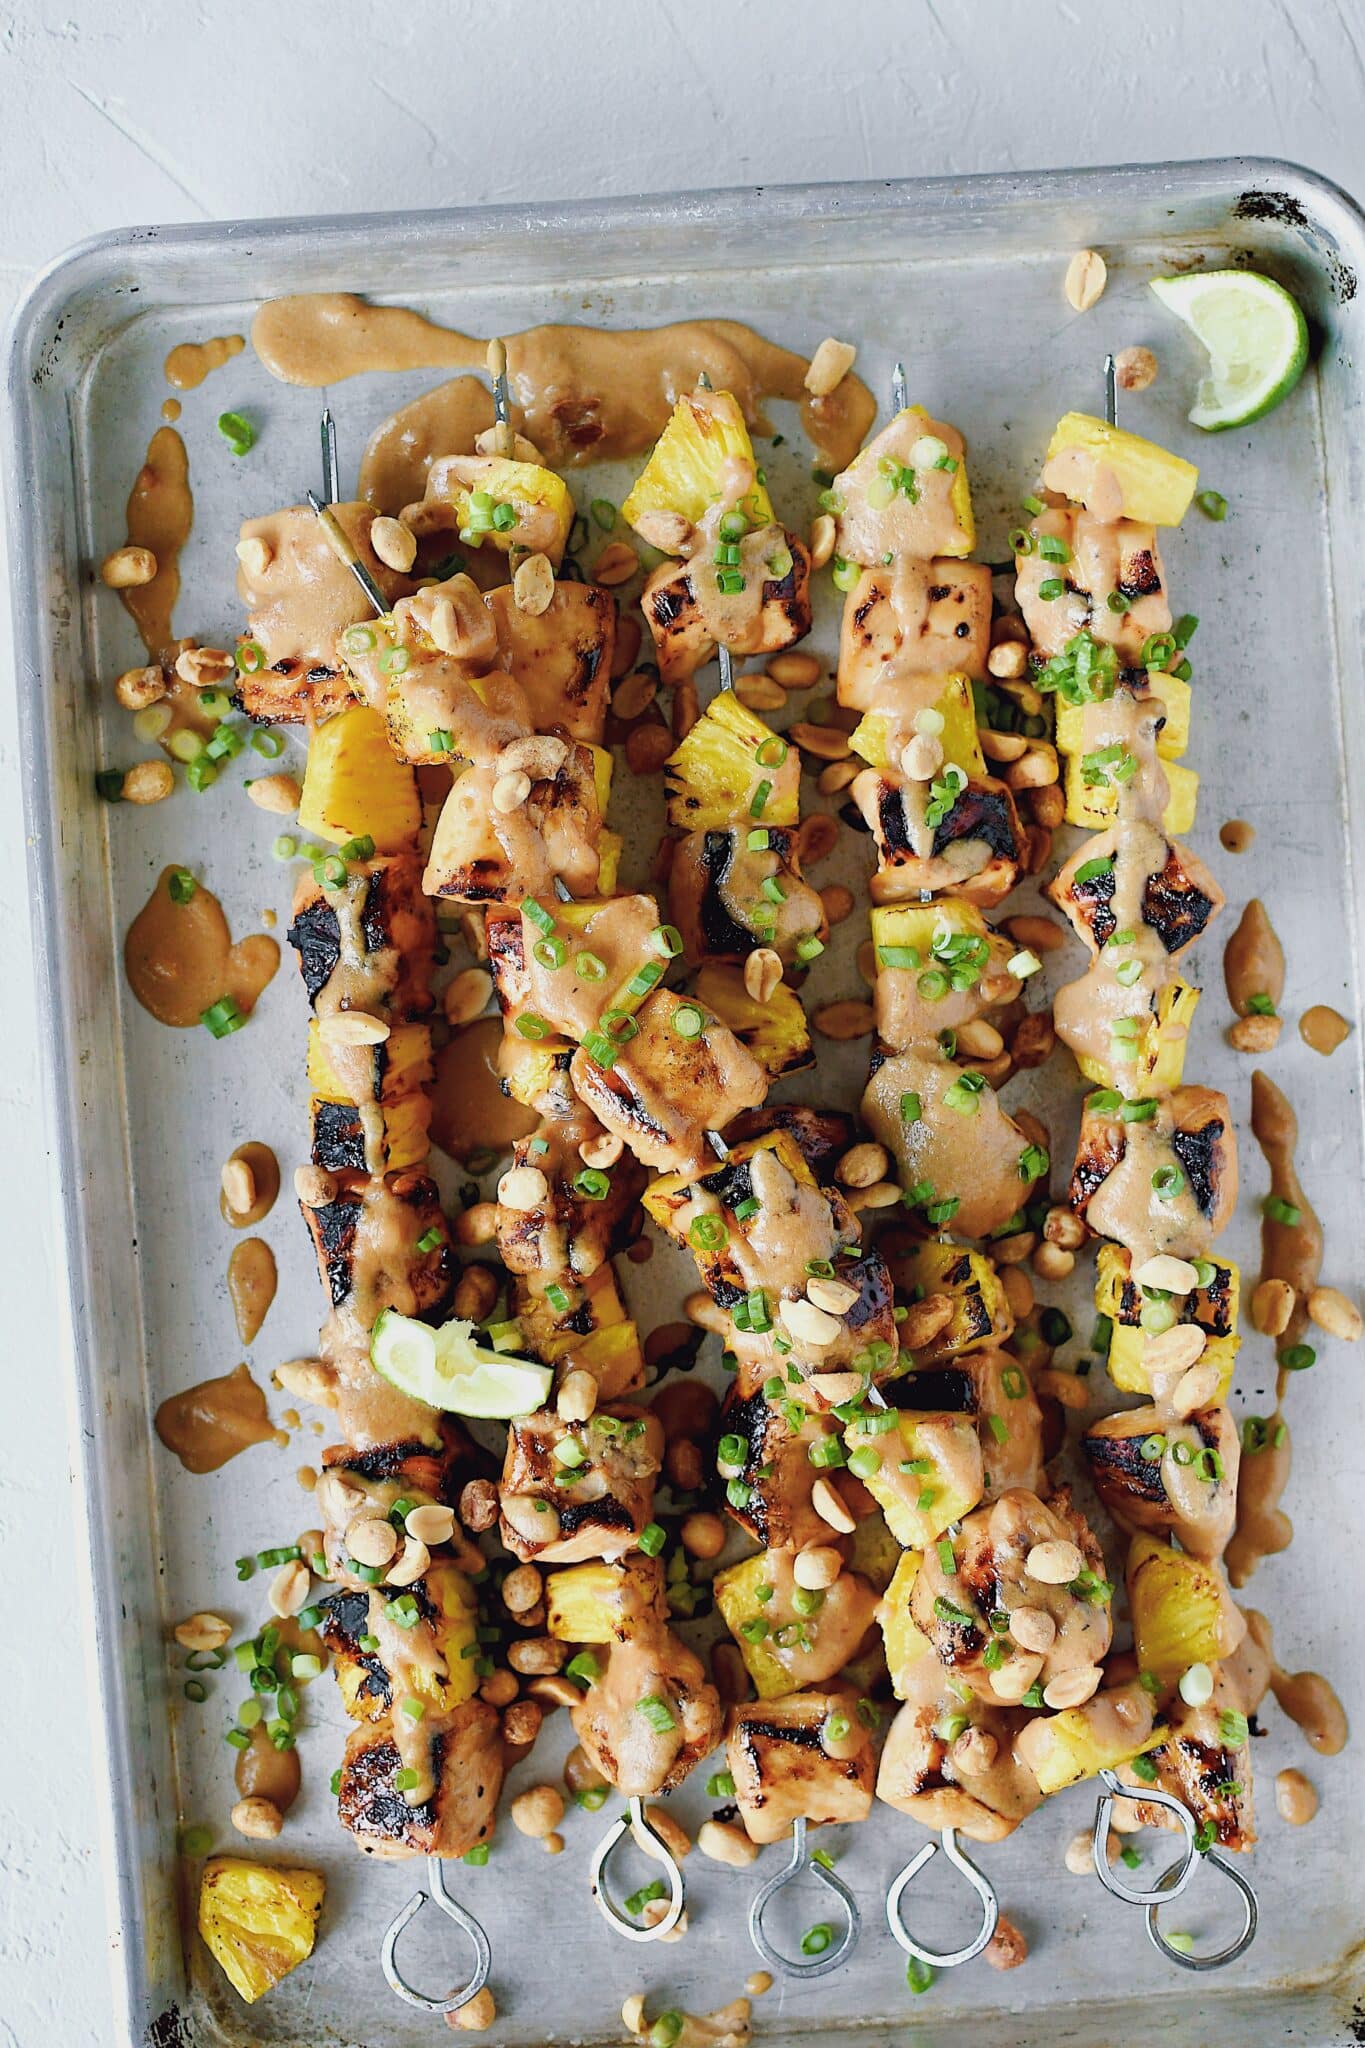 Pineapple Peanut Chicken Skewers fresh off the grill topped with peanut sauce, chopped green onions, and chopped peanuts.